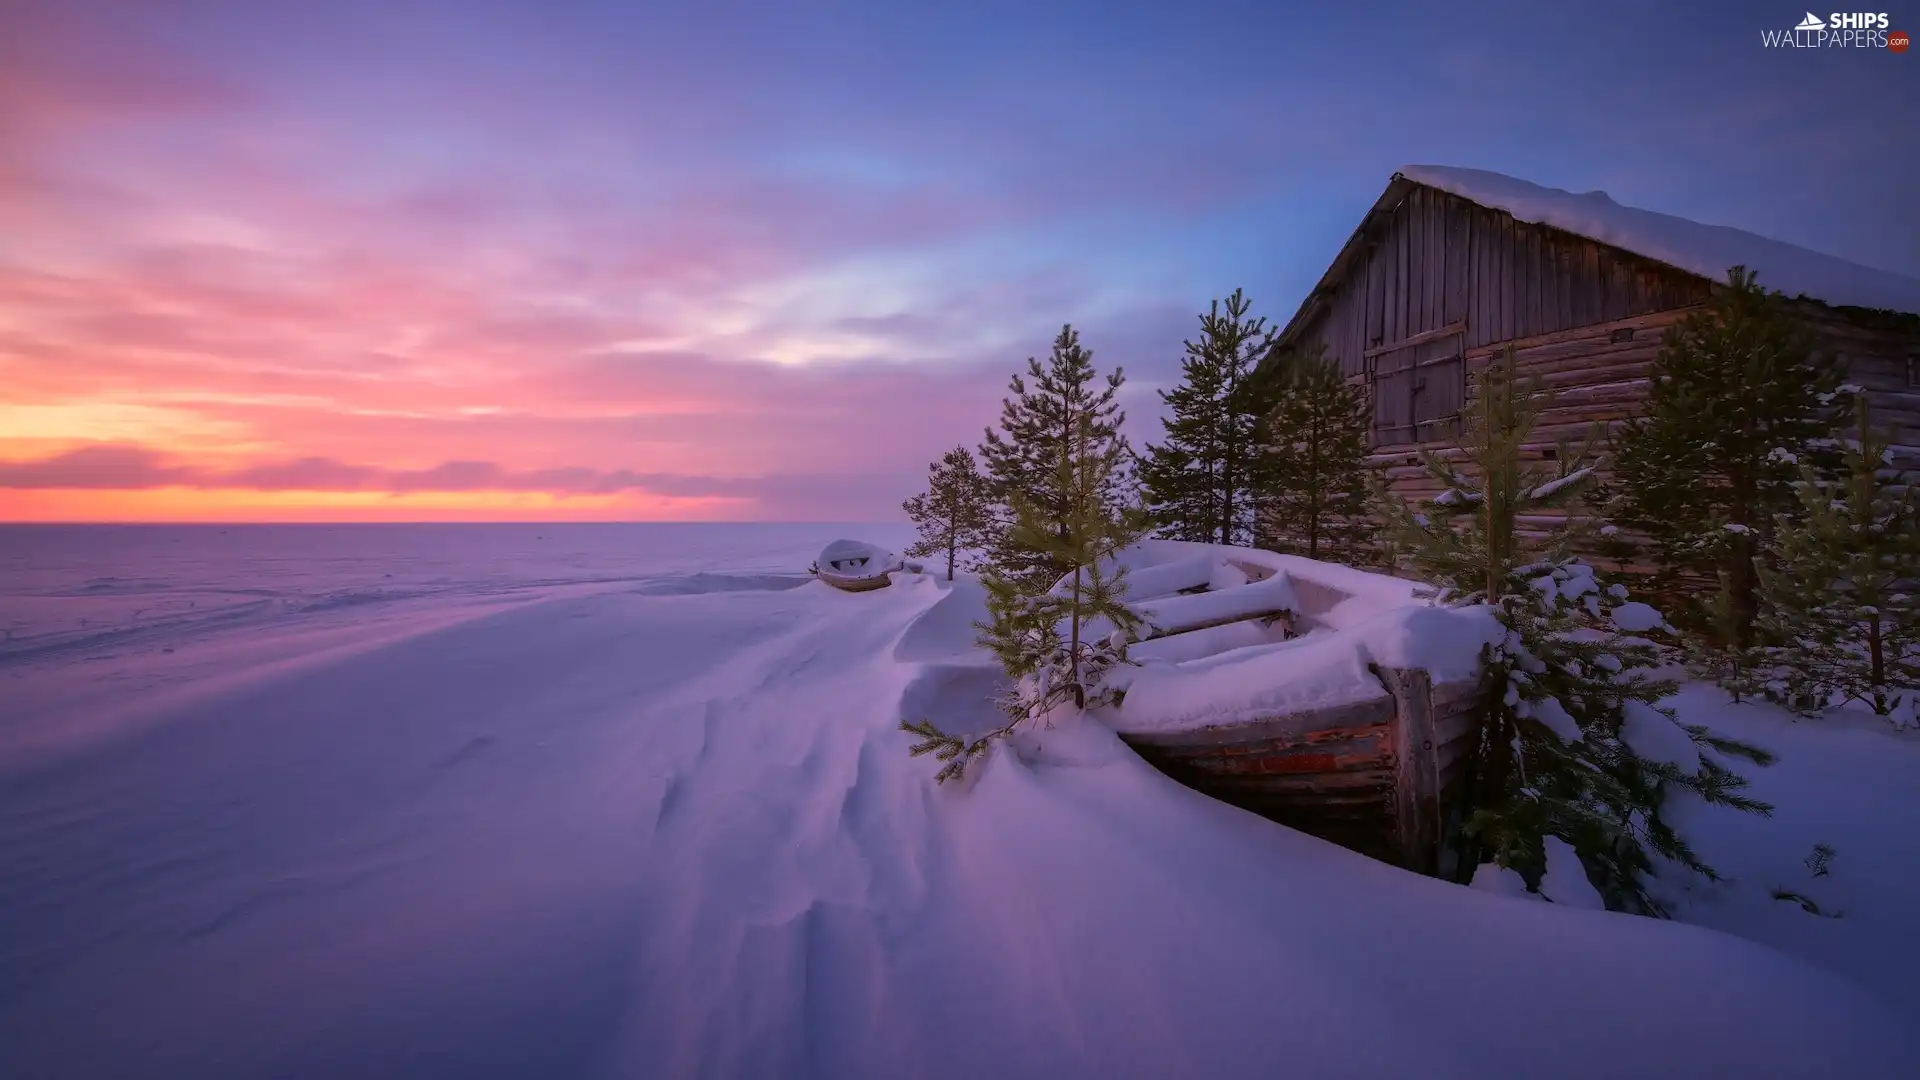 Boat, Great Sunsets, viewes, house, winter, trees, drifts